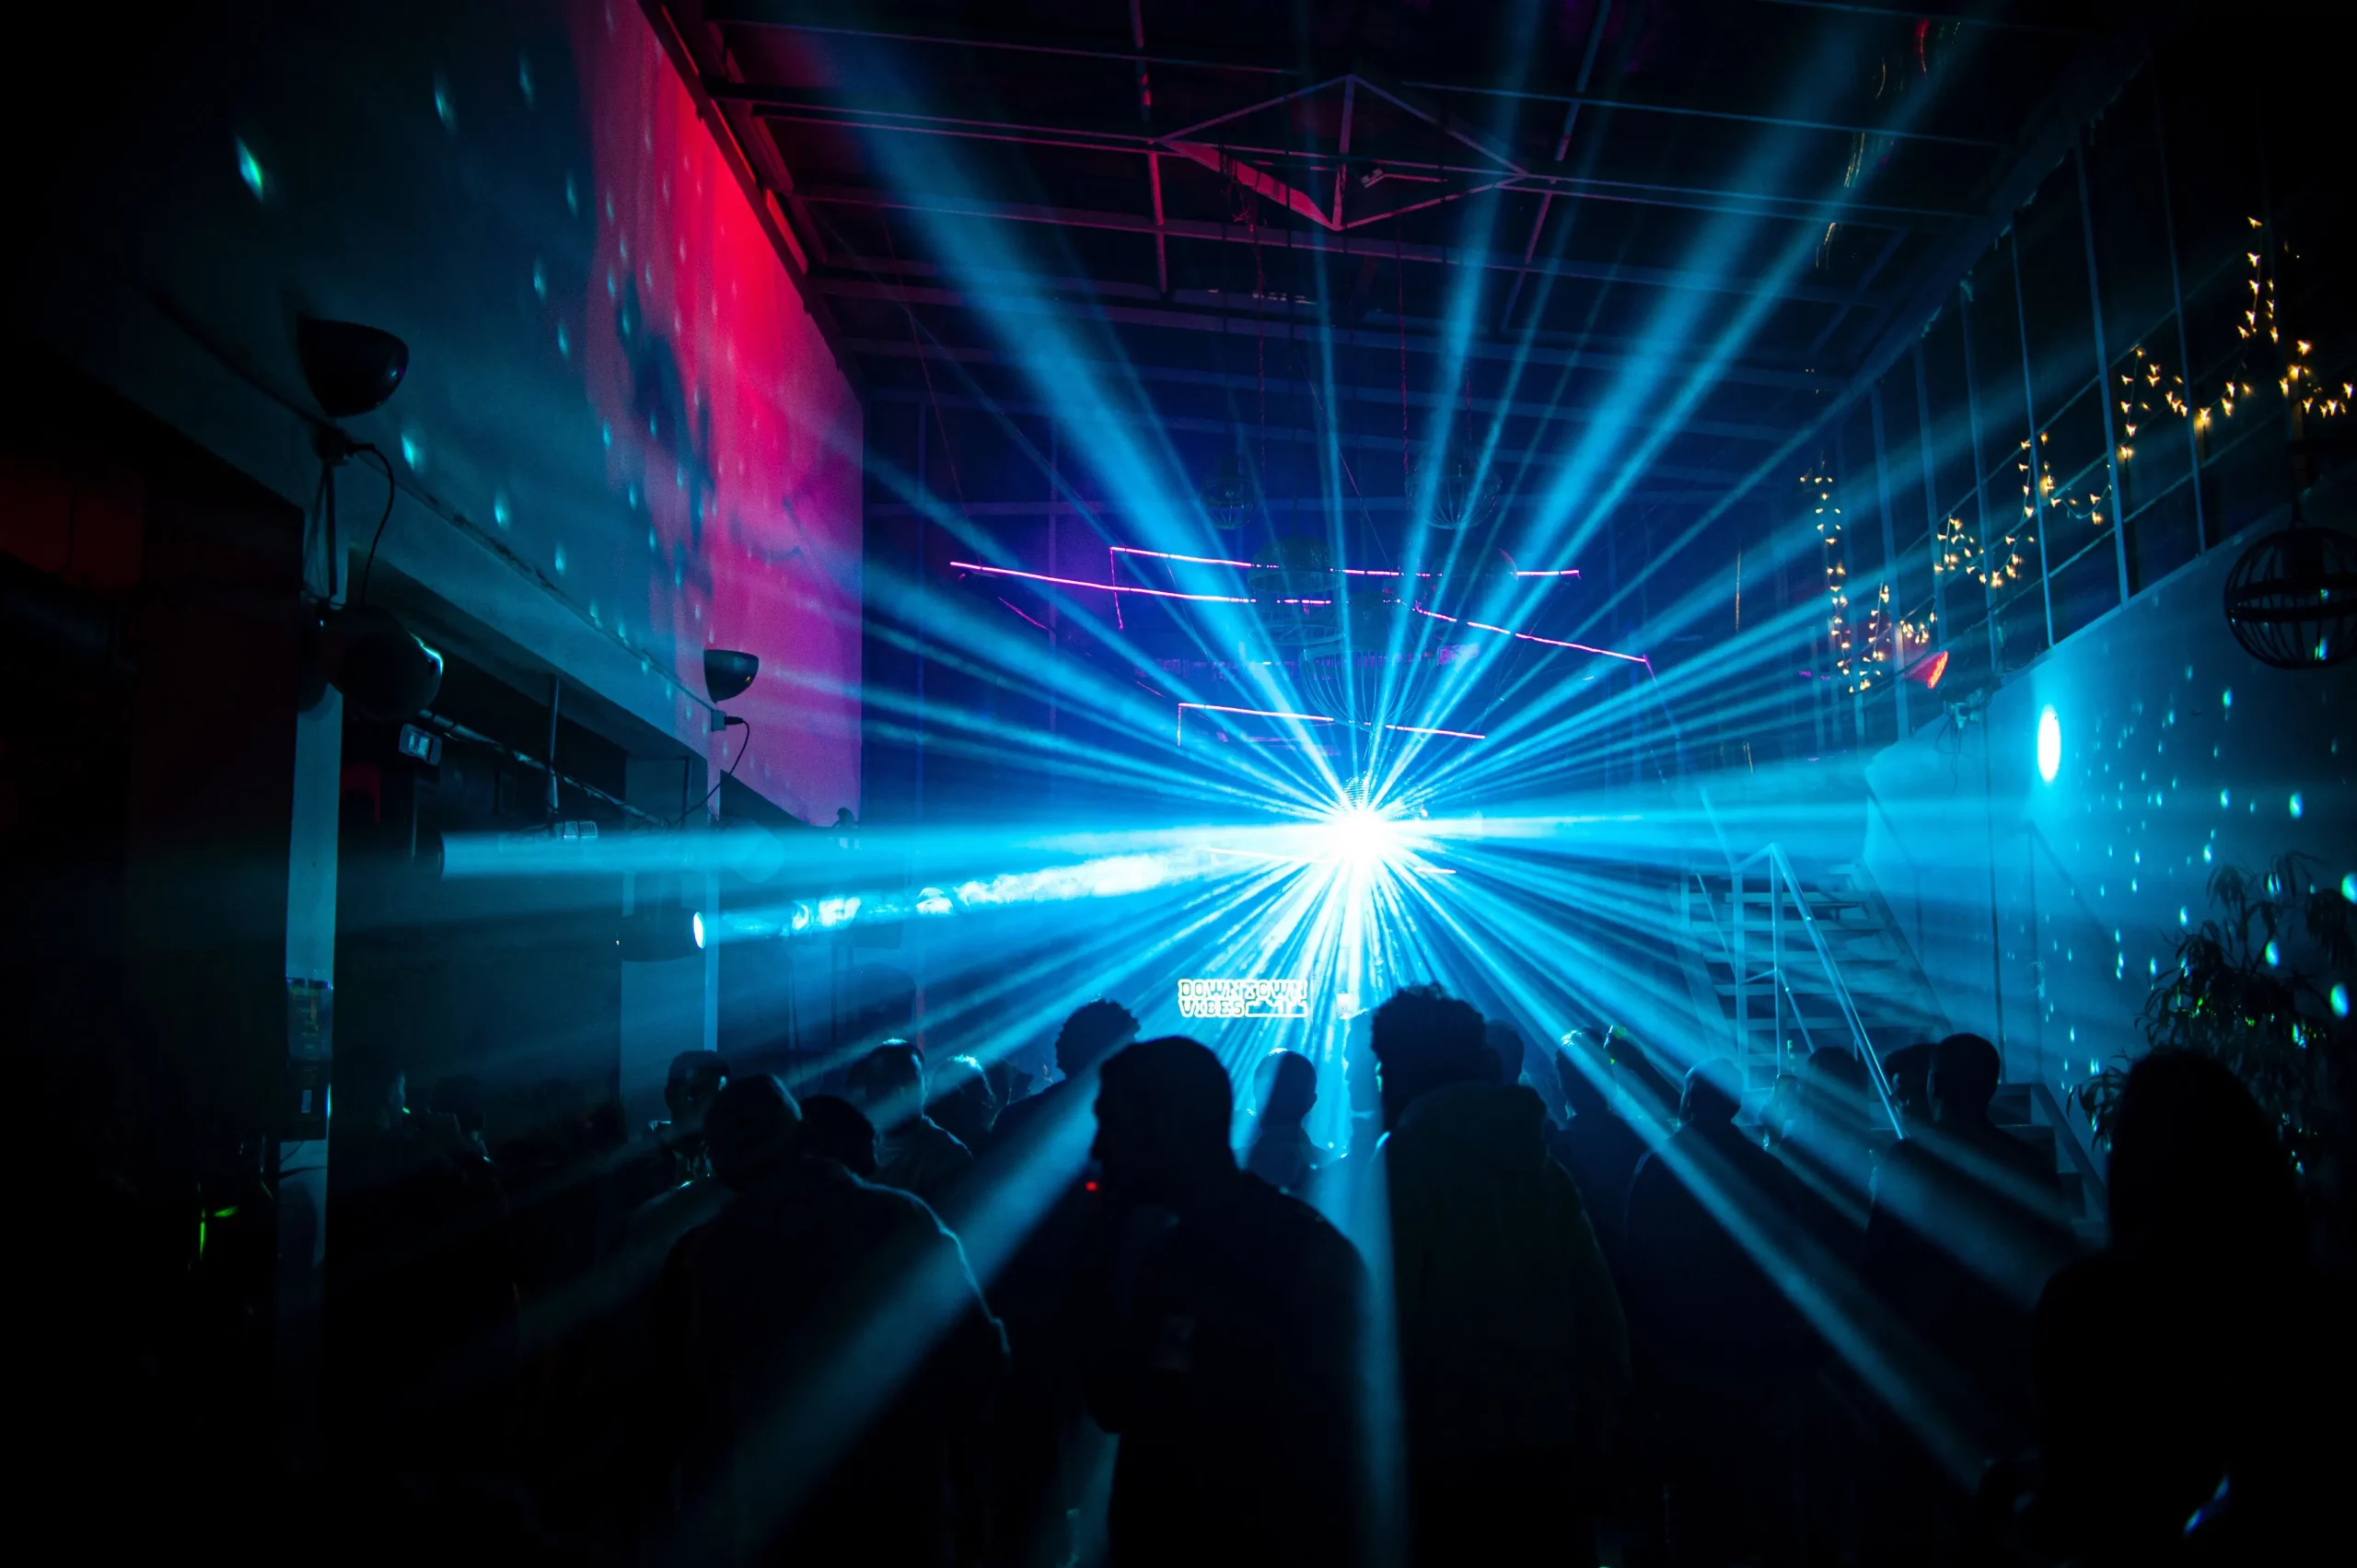 laser light show at a night club with a crowd enjoying the music and atmosphere